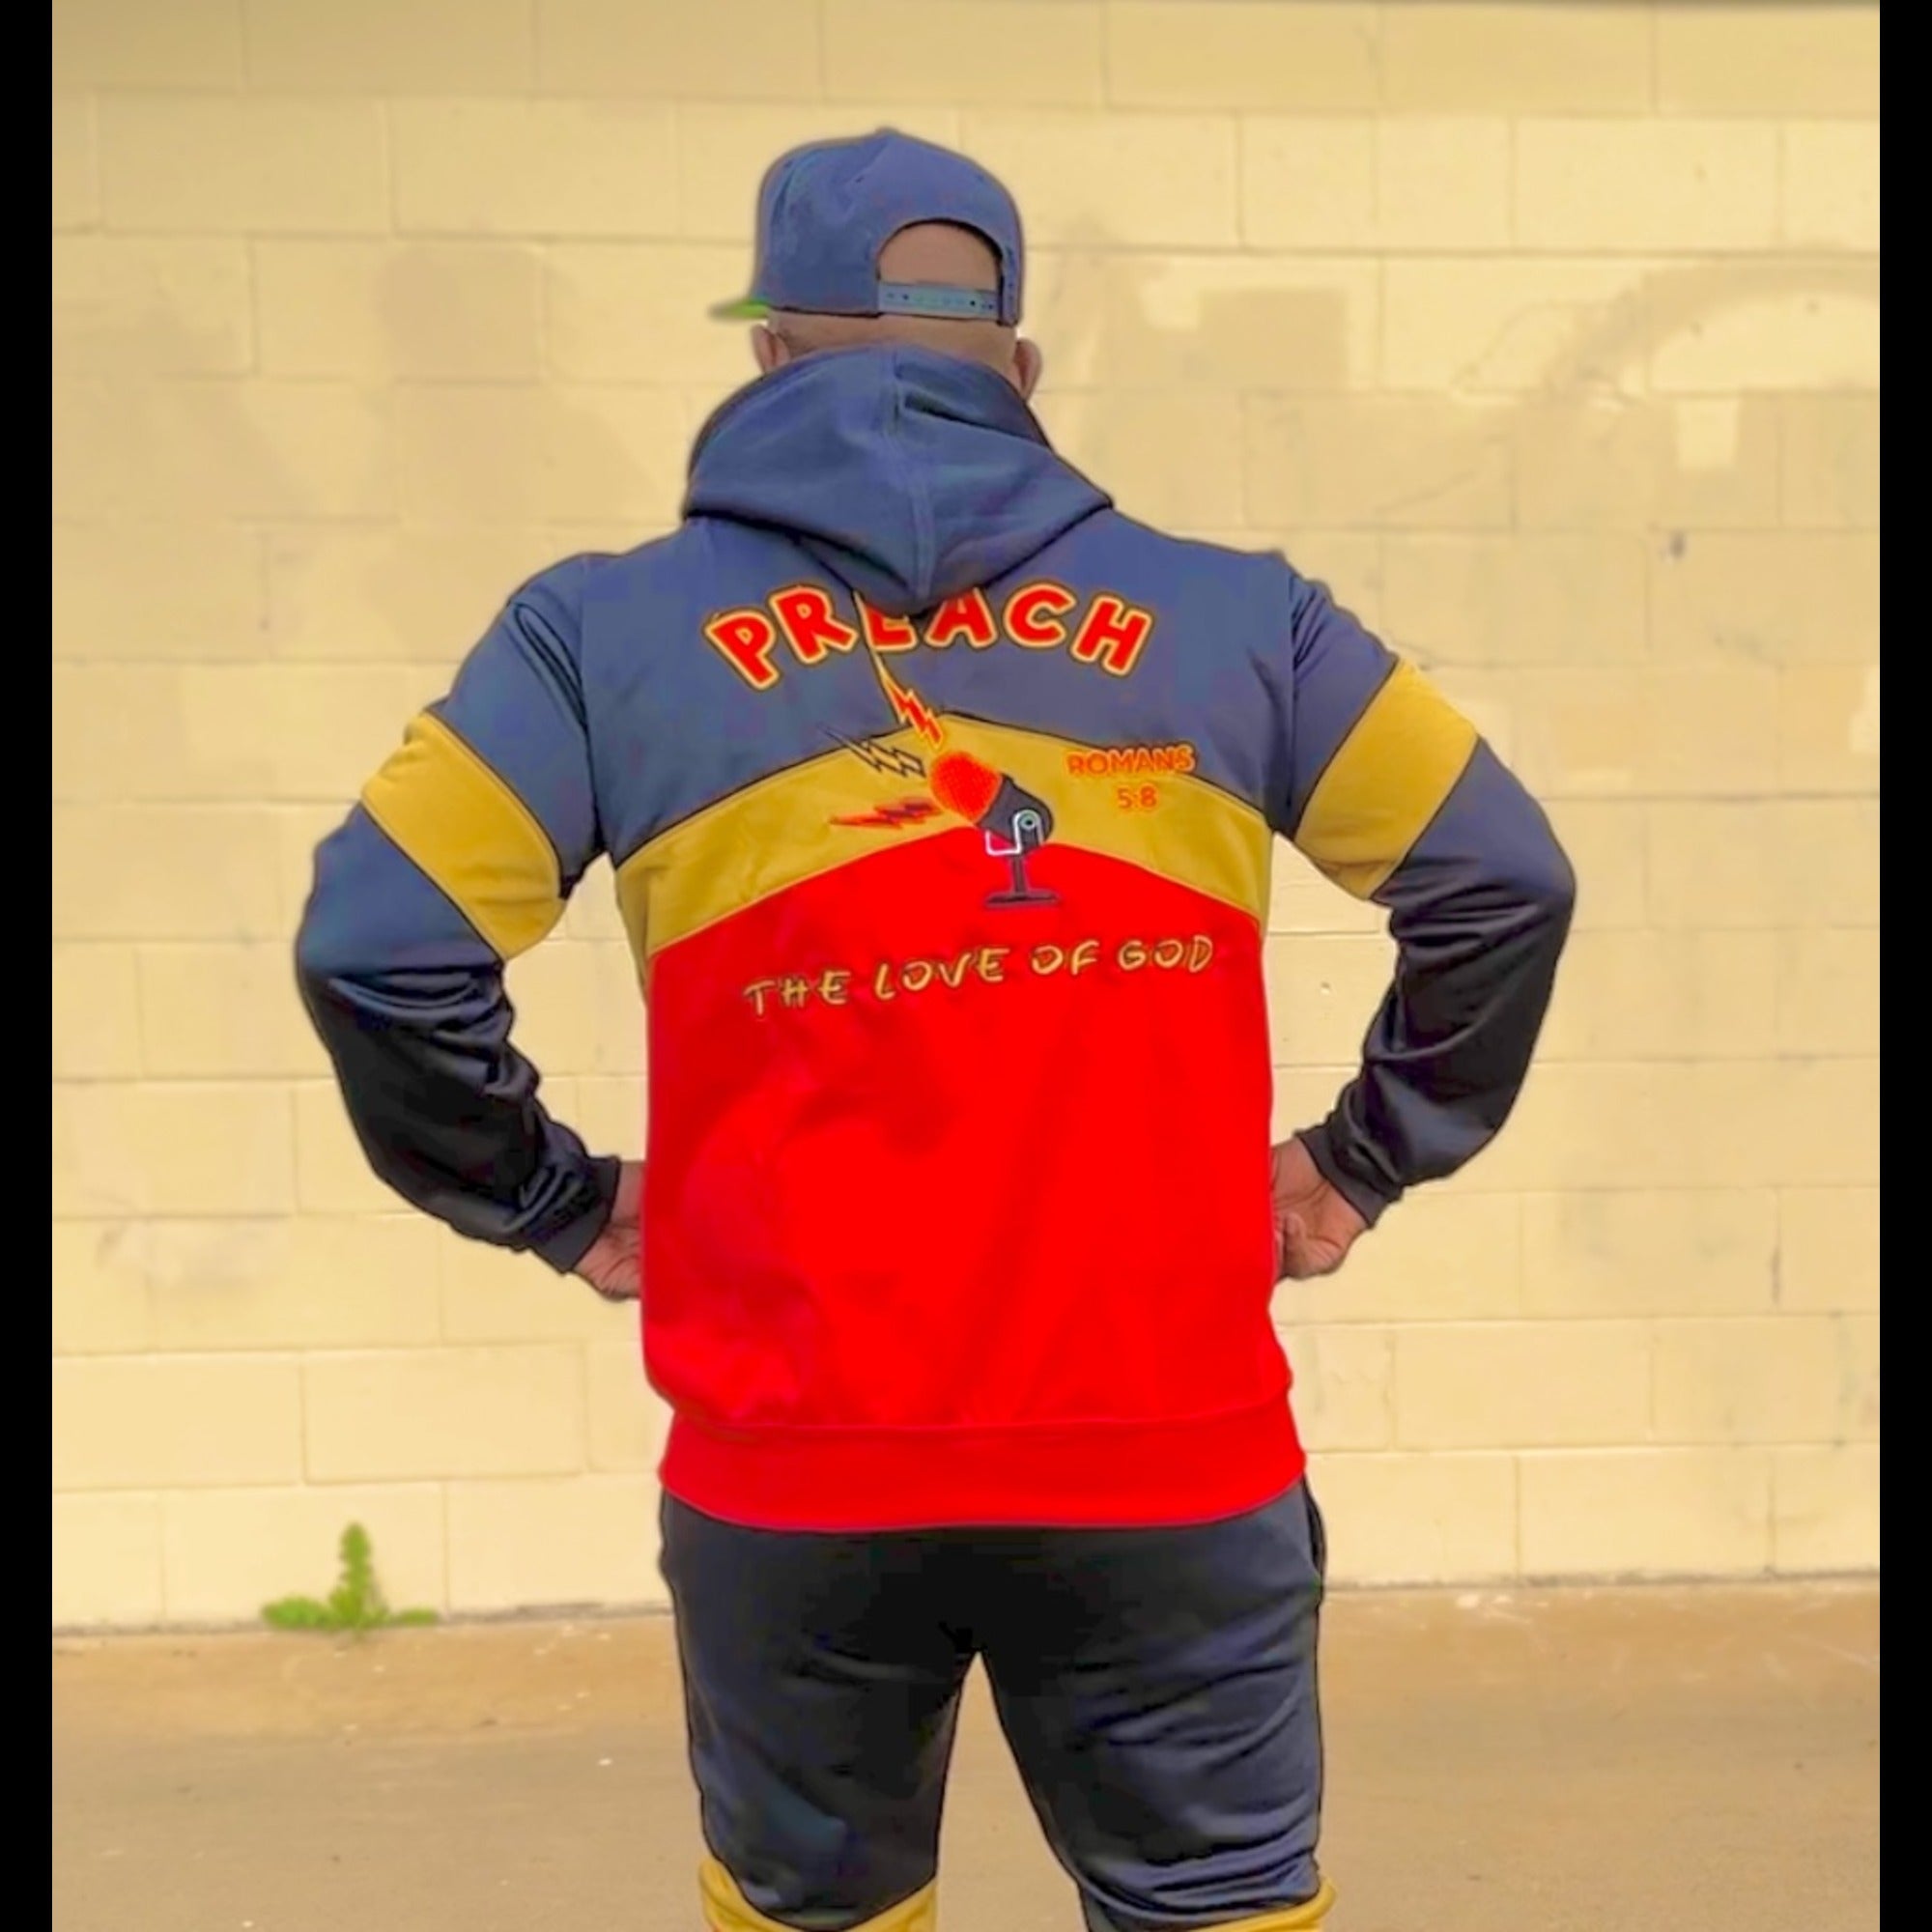 Preach Tracksuit Black/Red/Gold 100% Poly Tricot